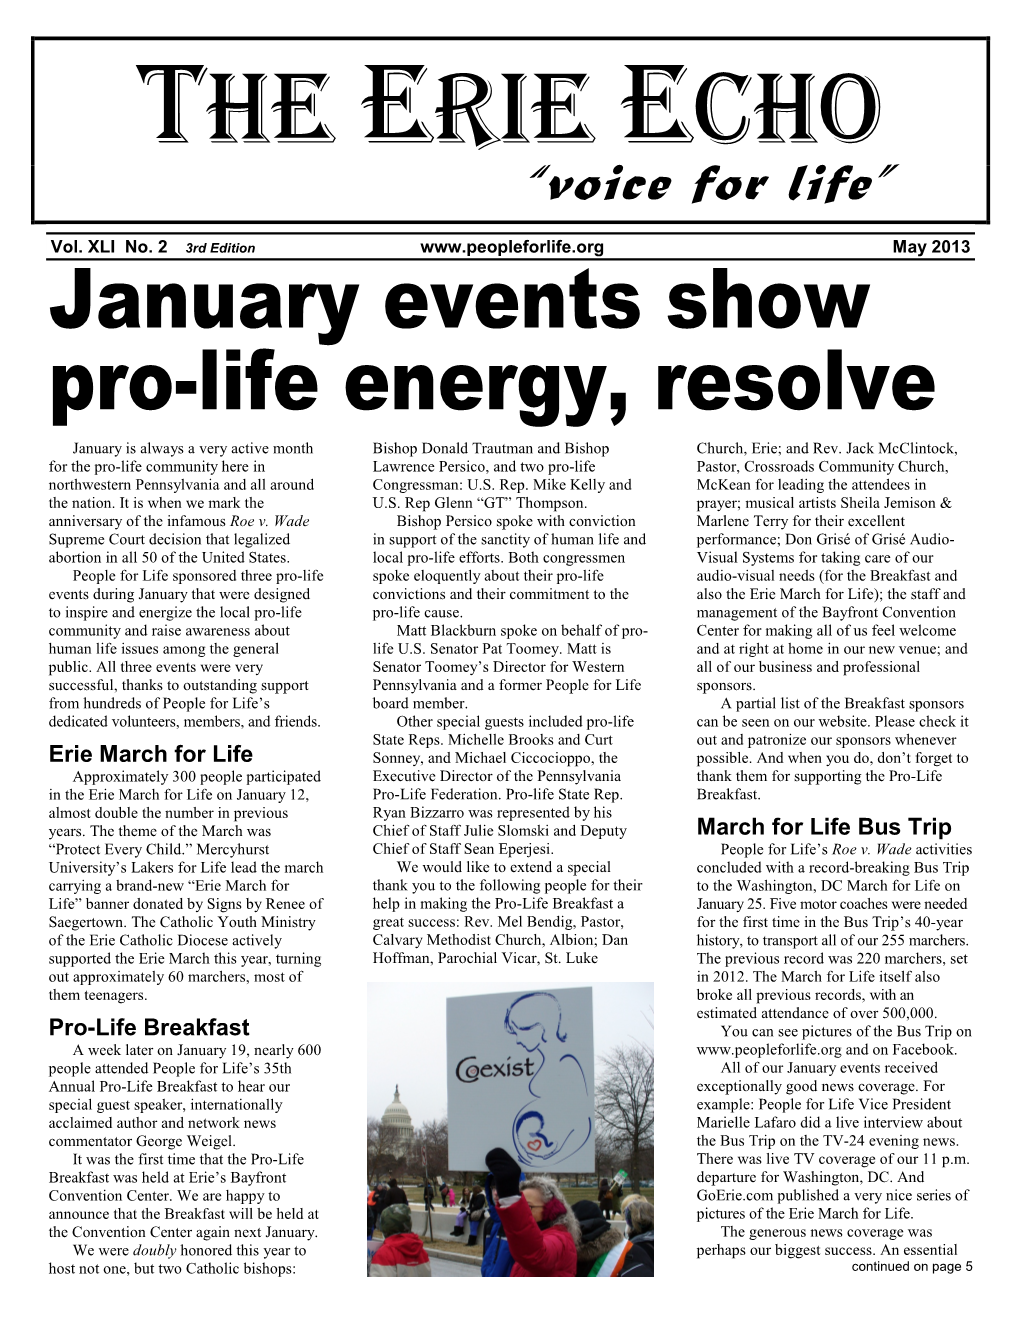 THE ERIE ECHO “Voice for Life”